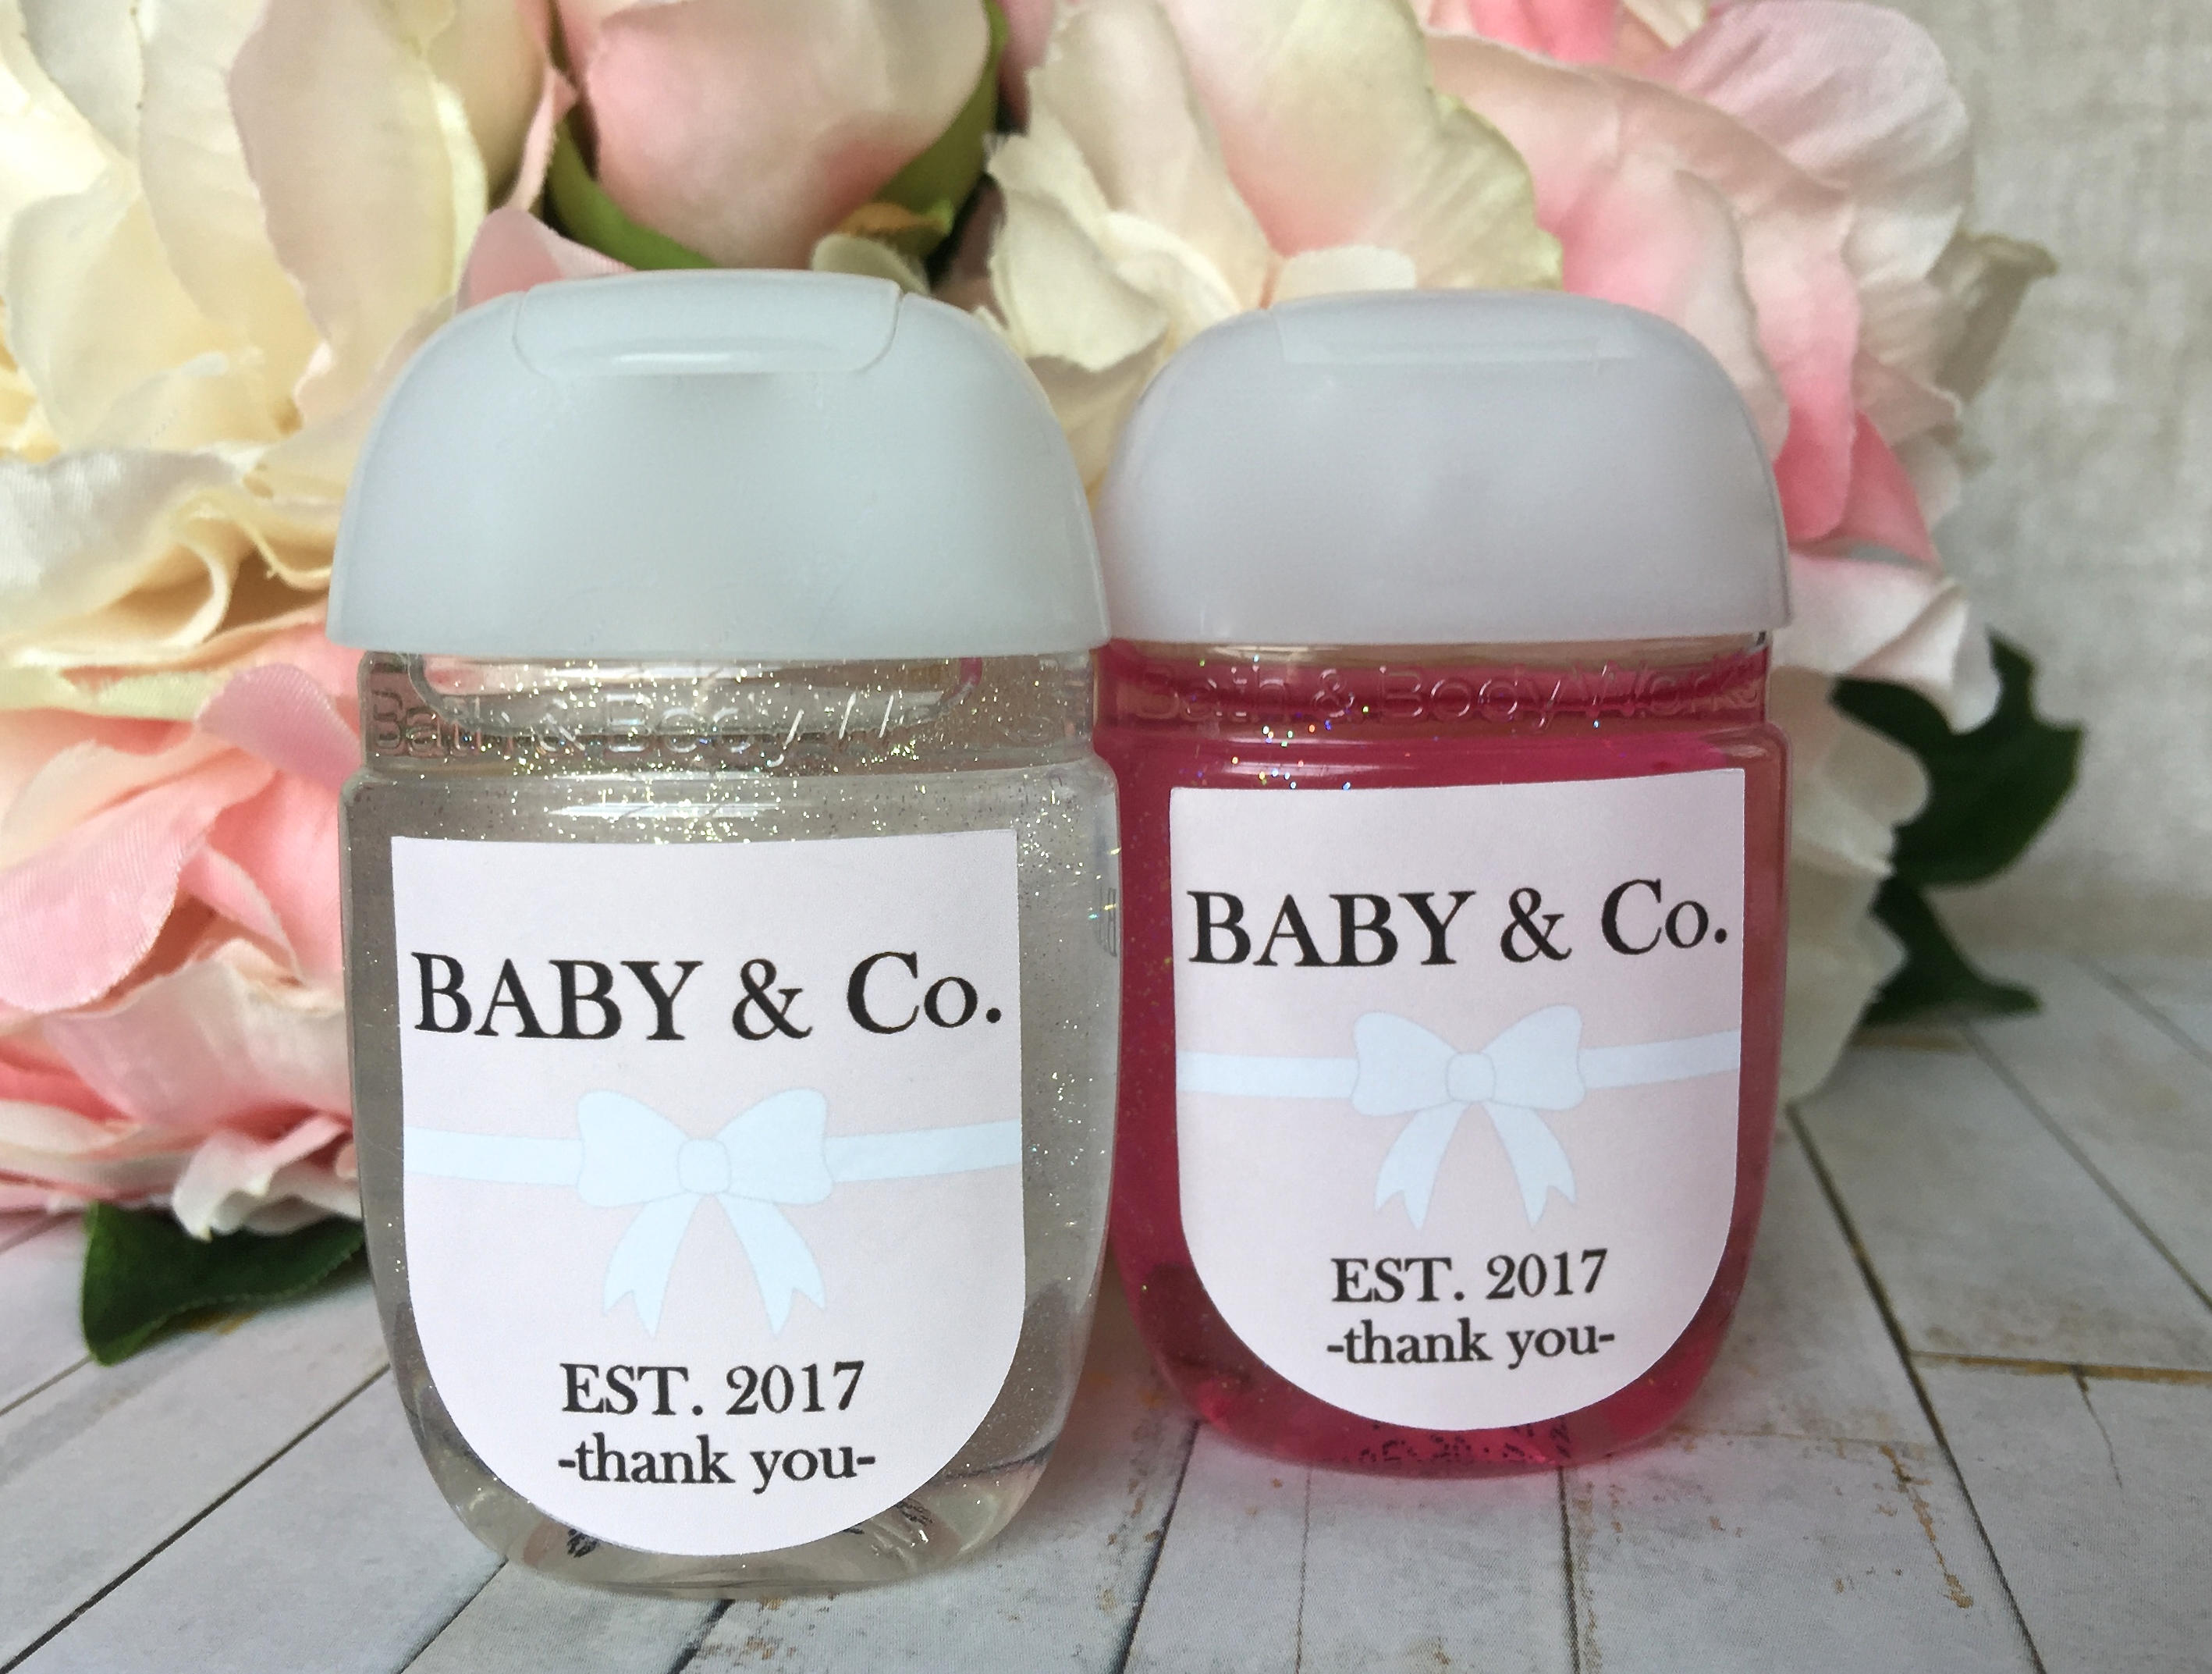 Blue Hot Air Balloon Baby Shower Hand Sanitizer Labels Printed Up Up and Away Hand Sanitizer Favor Stickers with 5 Size Options 0079-B